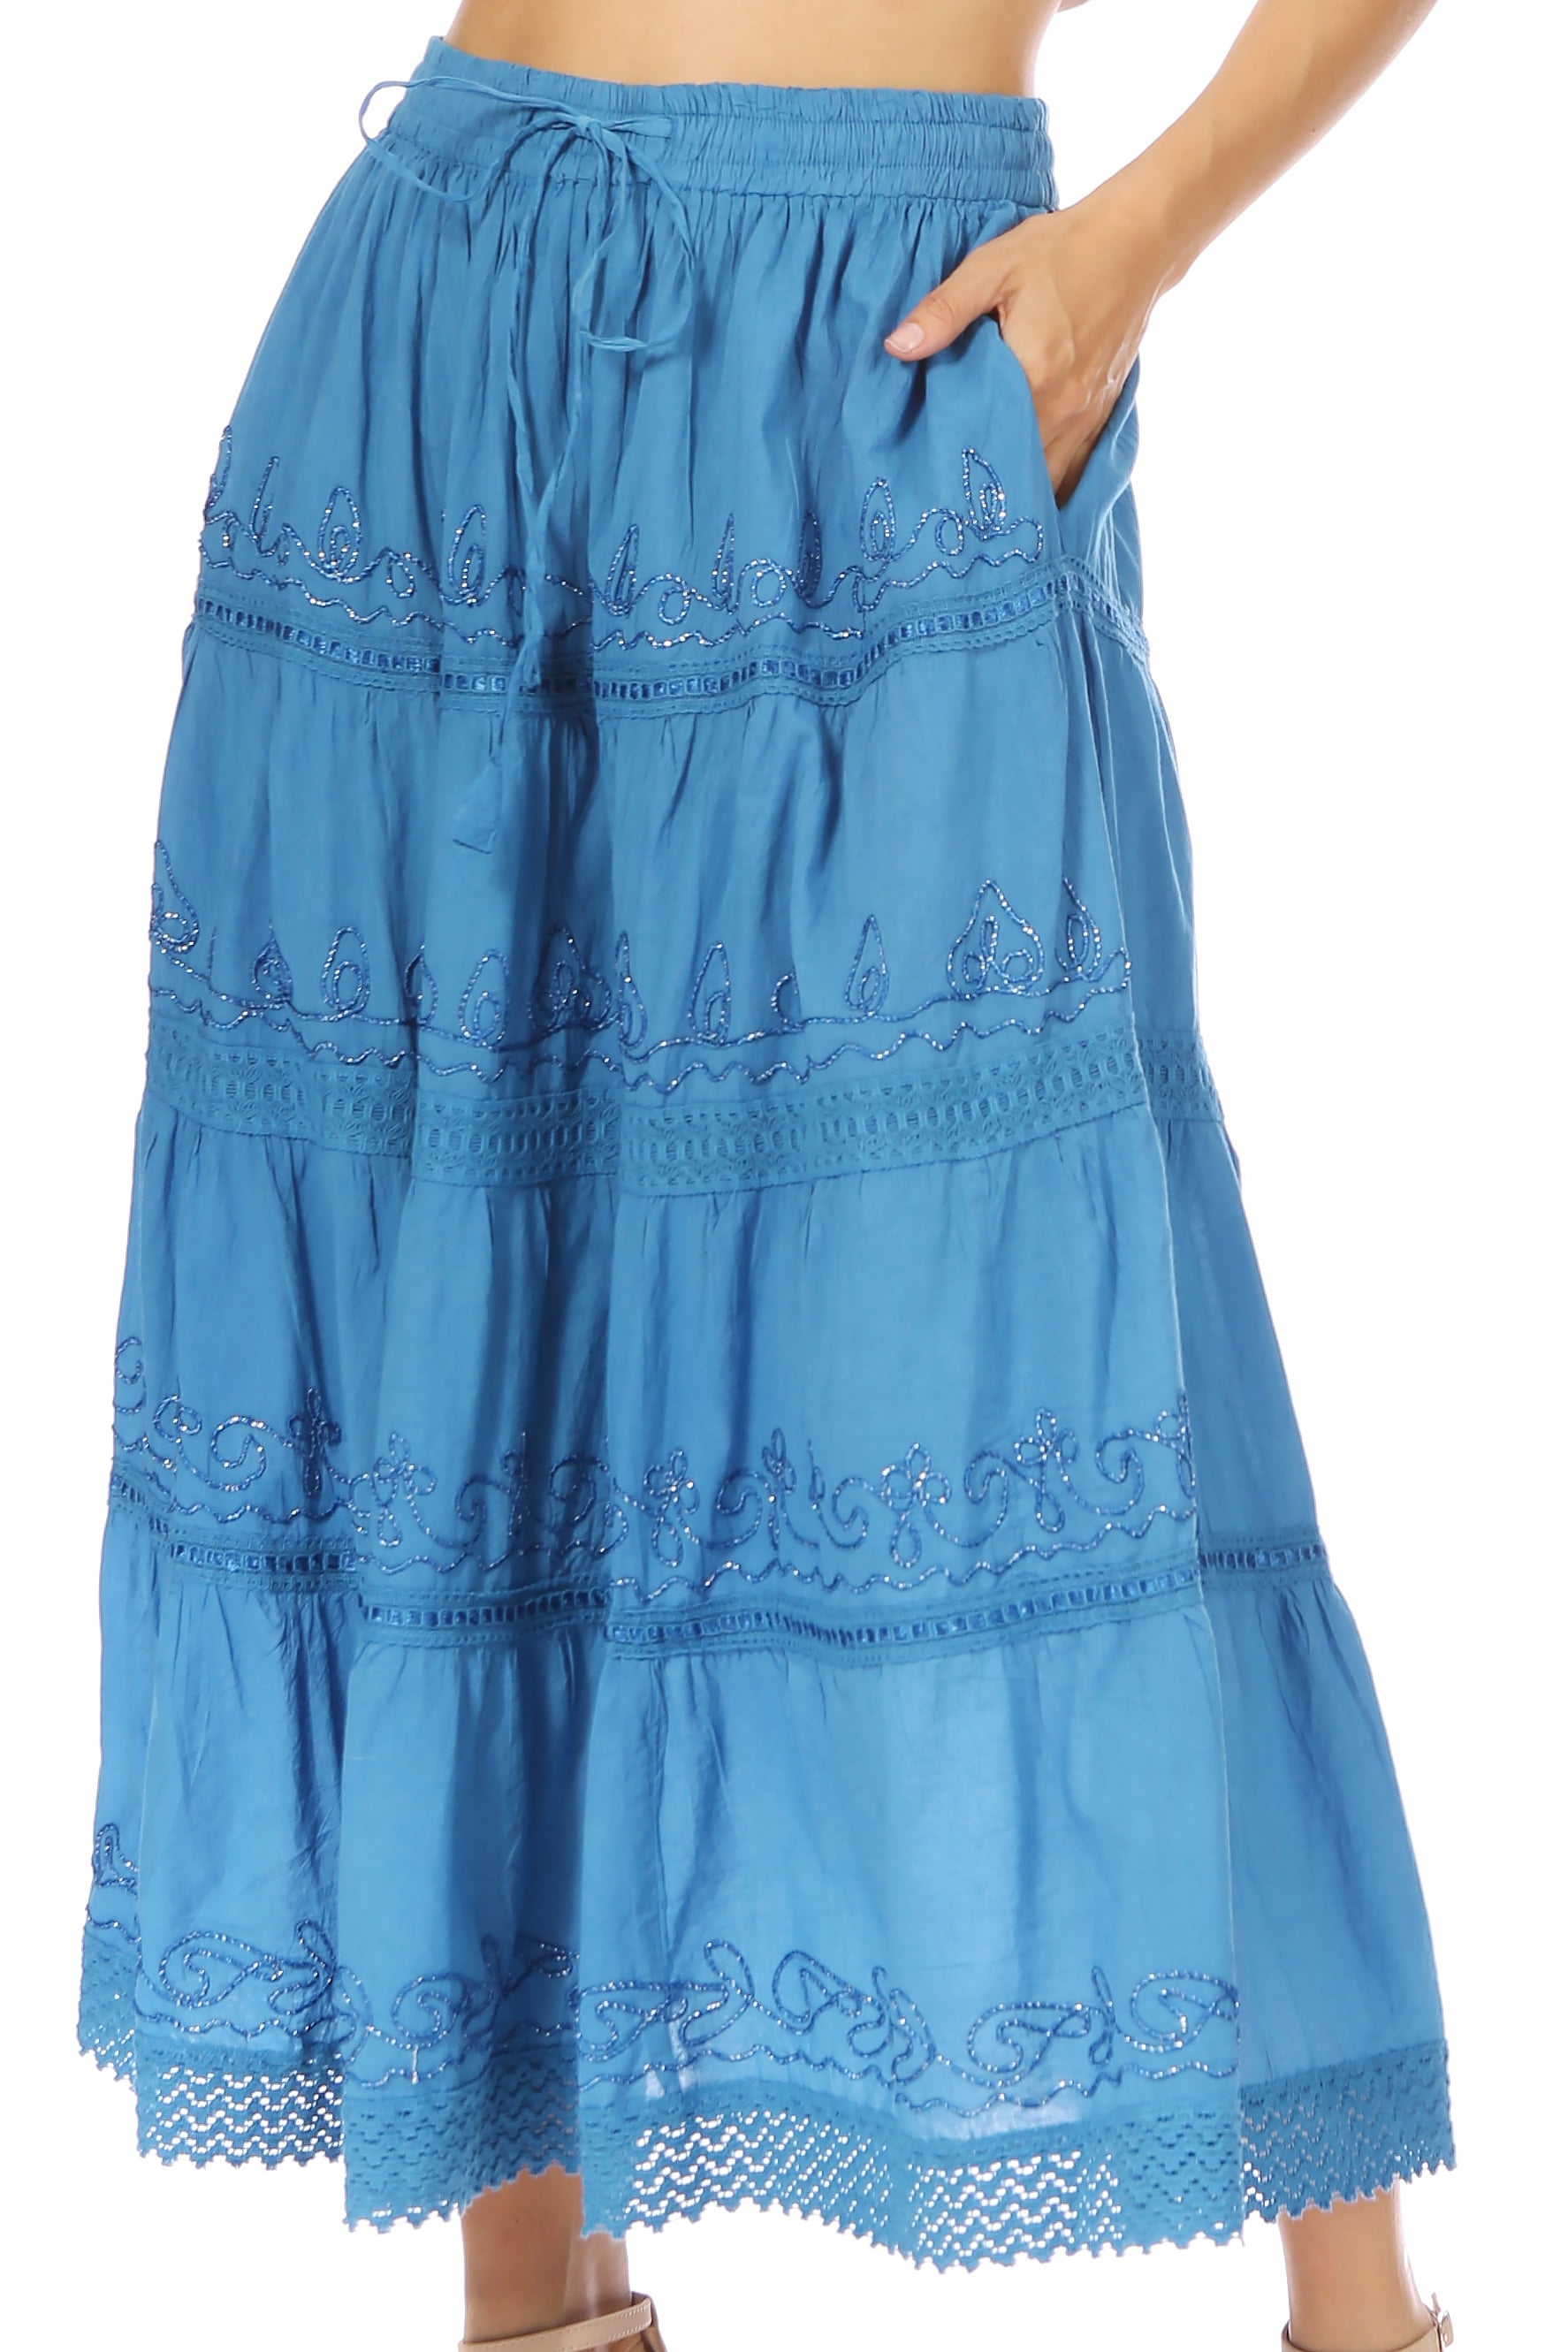 Sakkas Solid Embroidered Crochet Lace Trim Gypsy Bohemian Mid Length Cotton  Skirt - Blue - One Size - Walmart.com